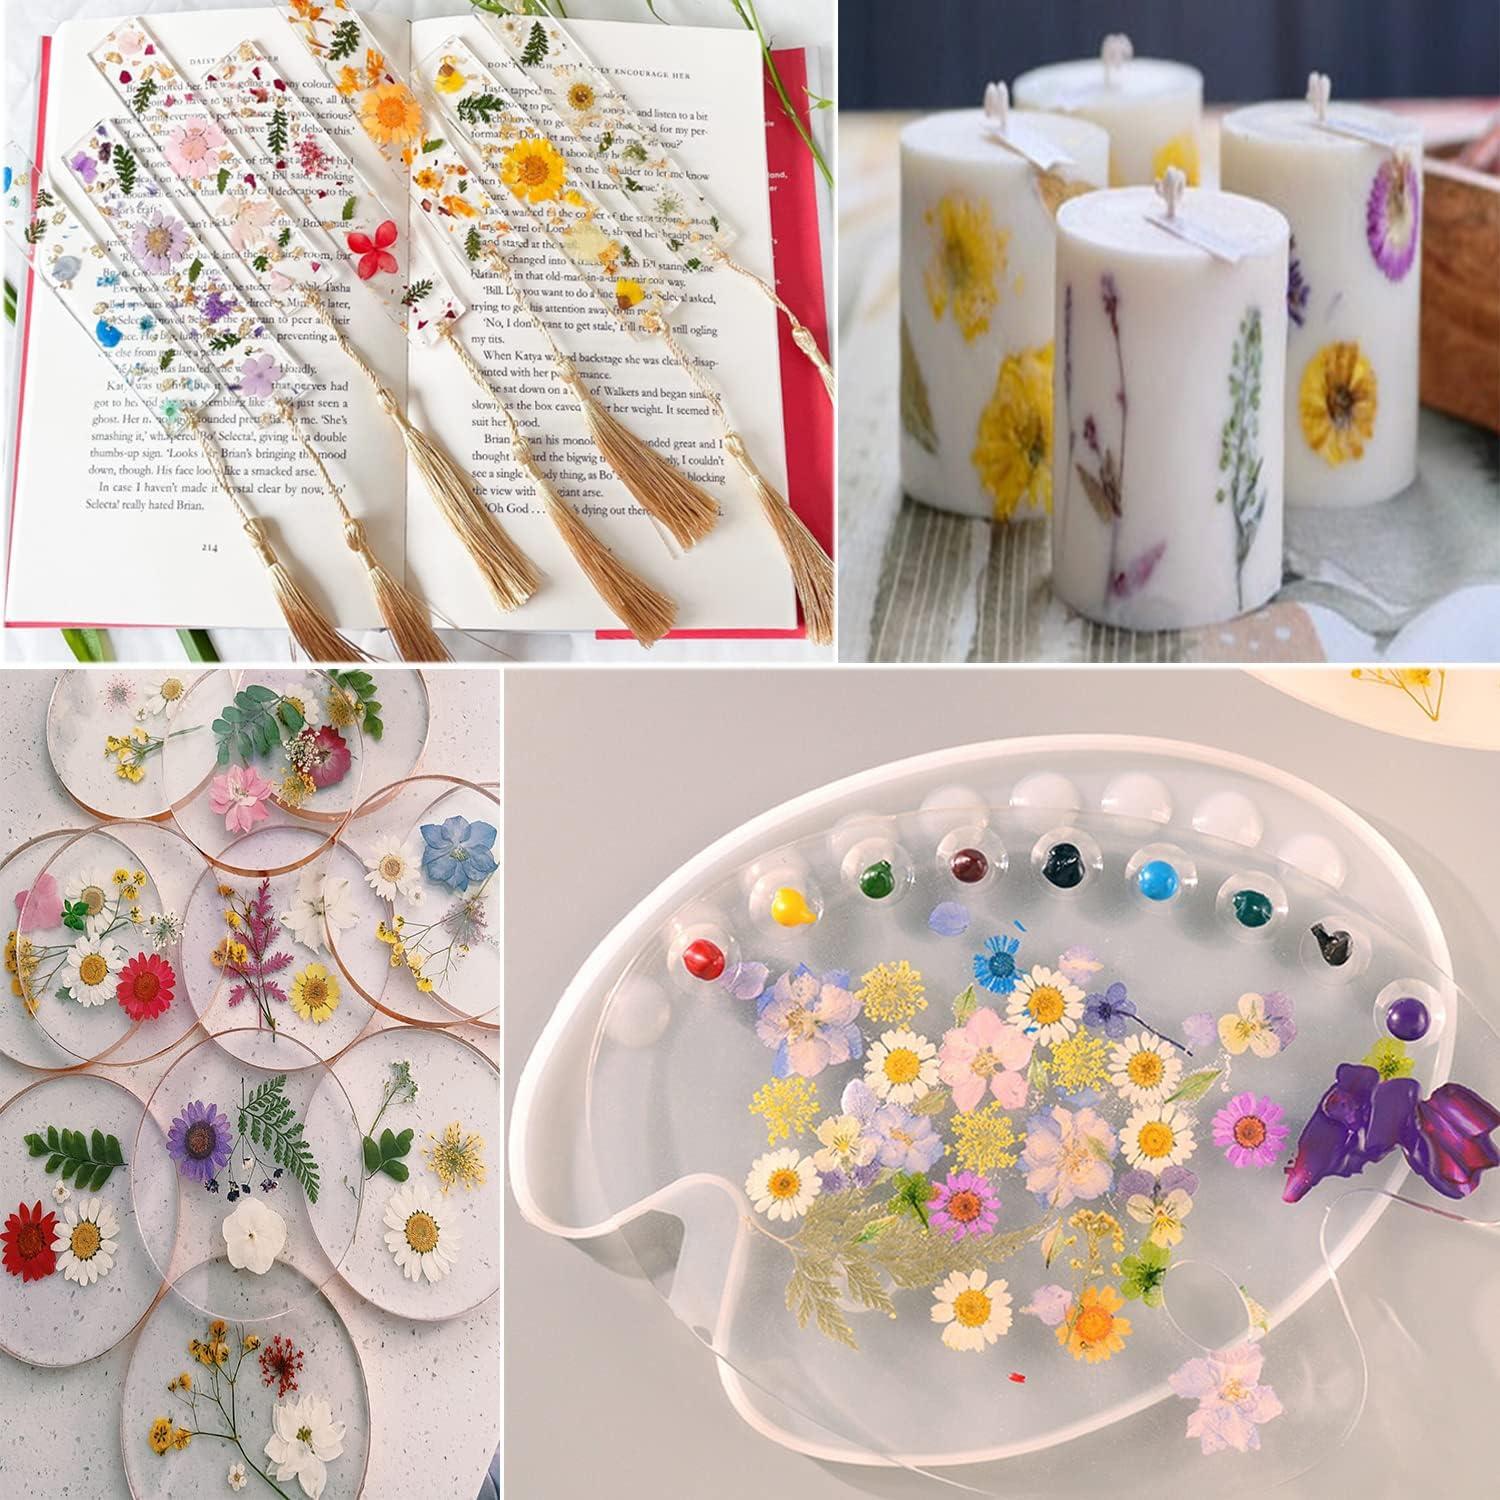 Resiners 100Pcs Dried Pressed Flowers & Quickly Microwave Flower Press Kit,  Flower Press for Plant DIY Arts, Resin Arts, Scrapbooking, Nail Craft 